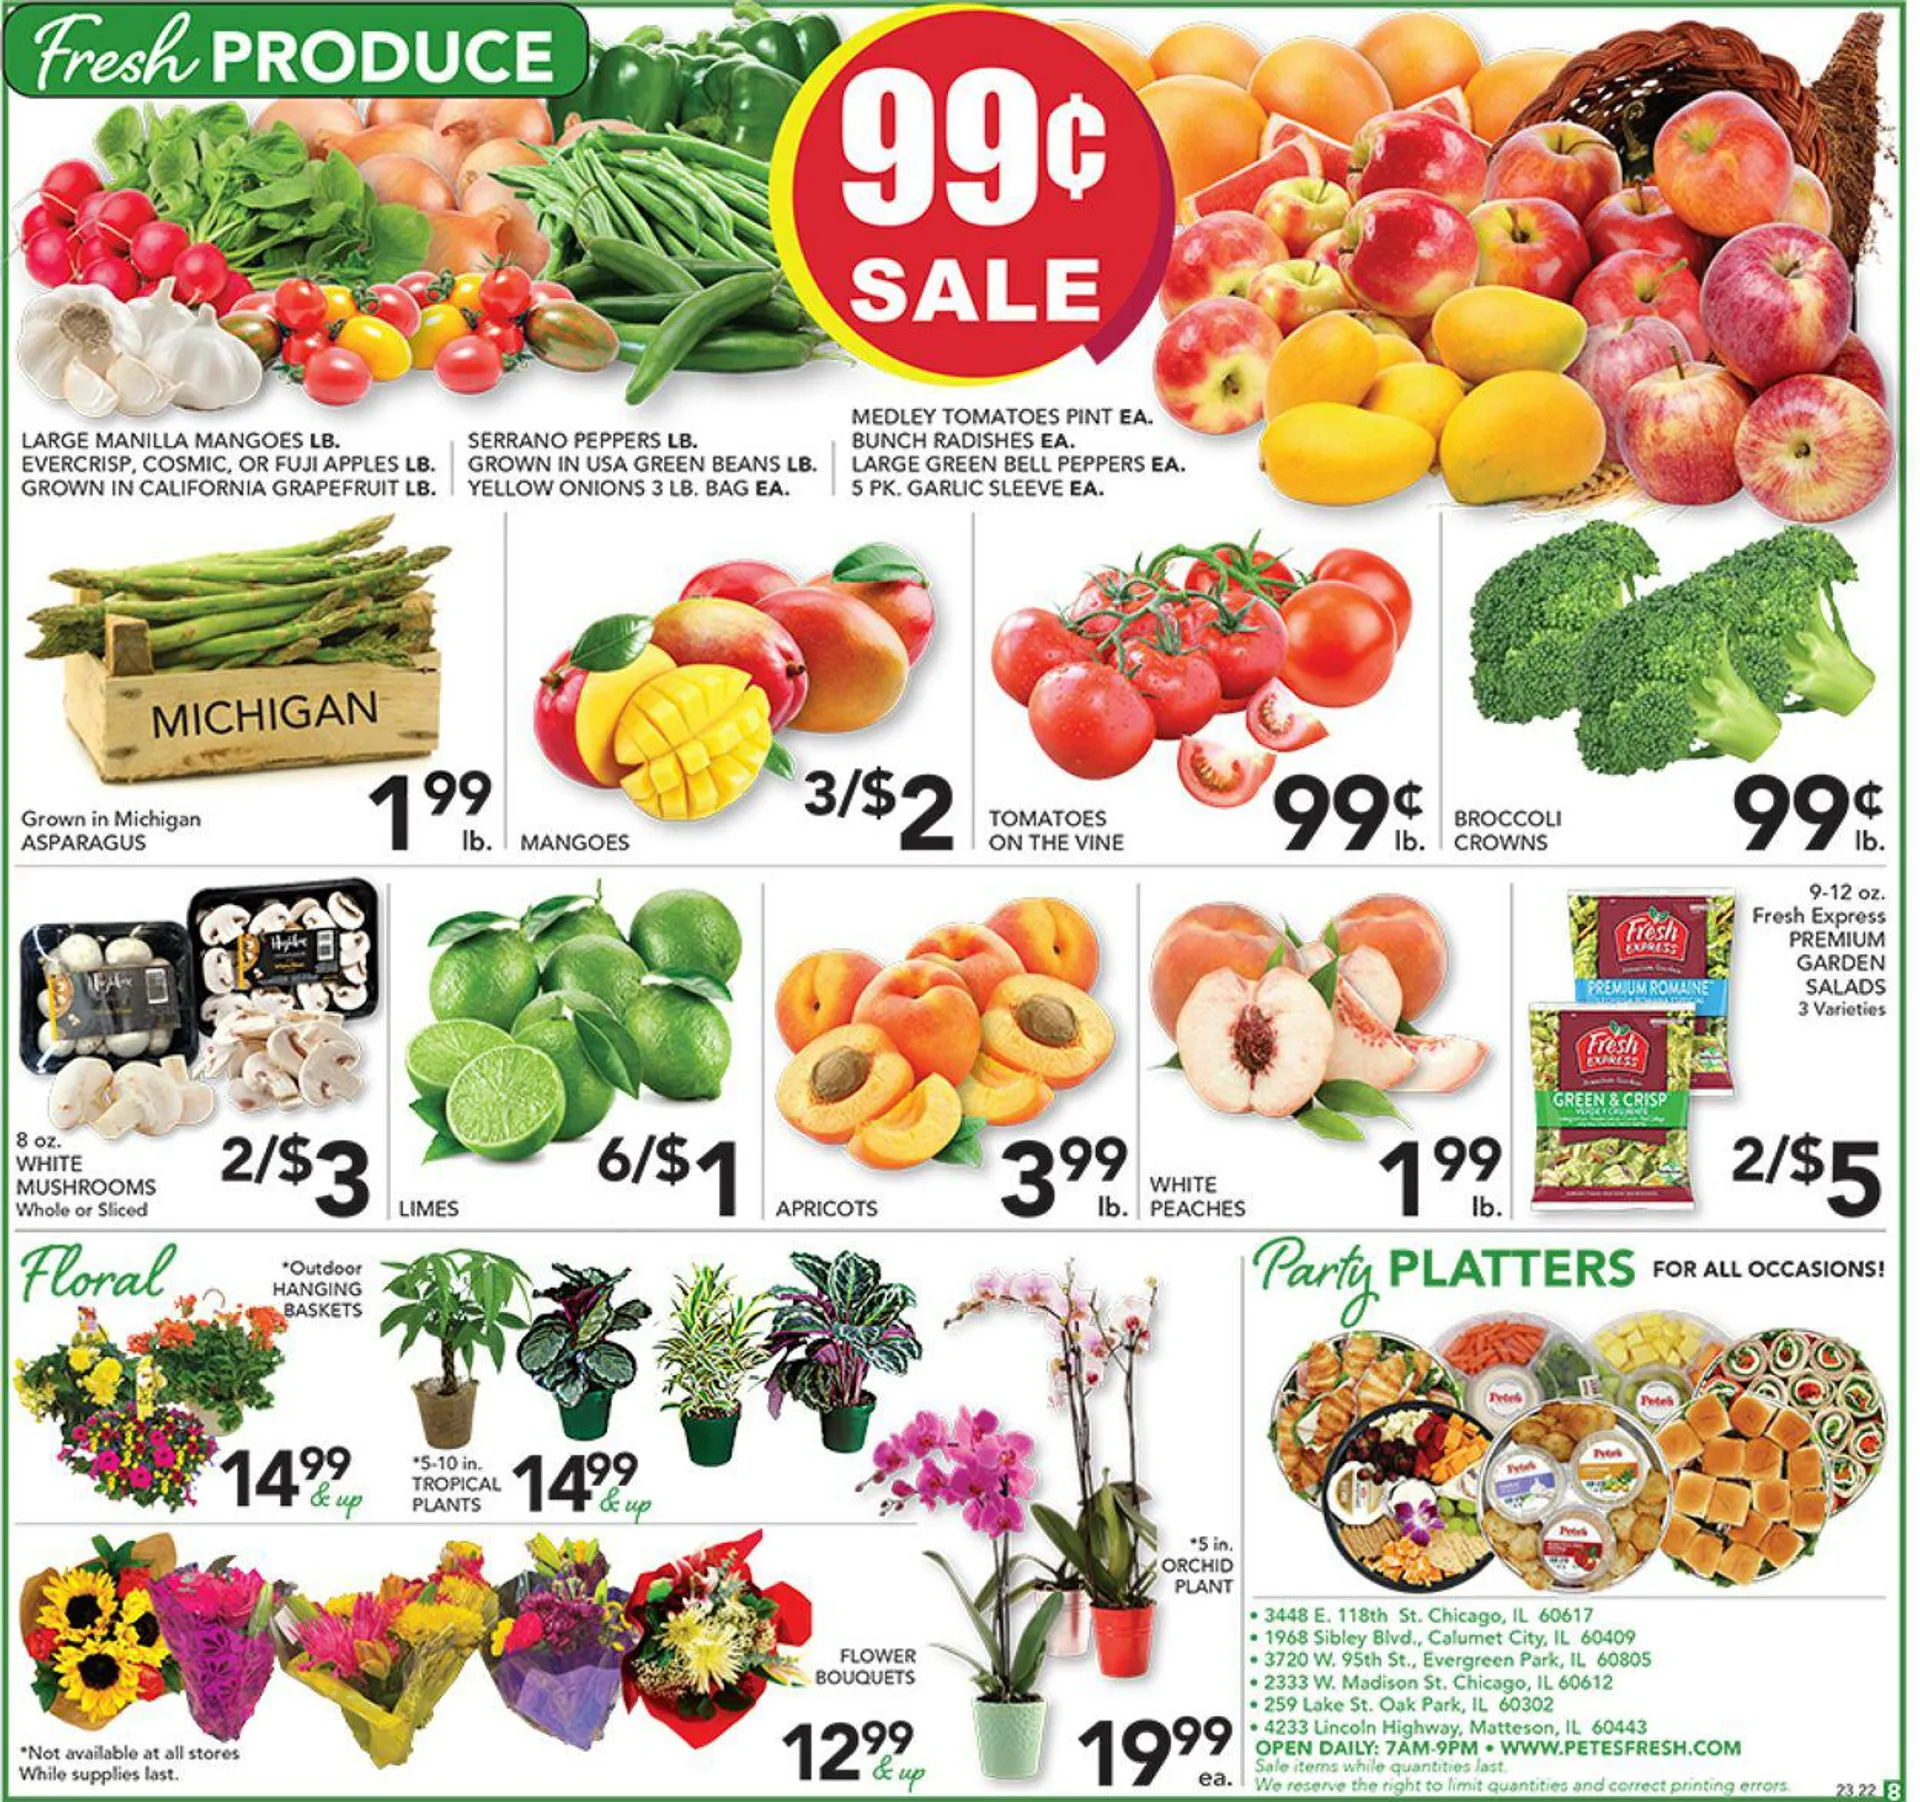 Petes Fresh Market Current weekly ad - 10